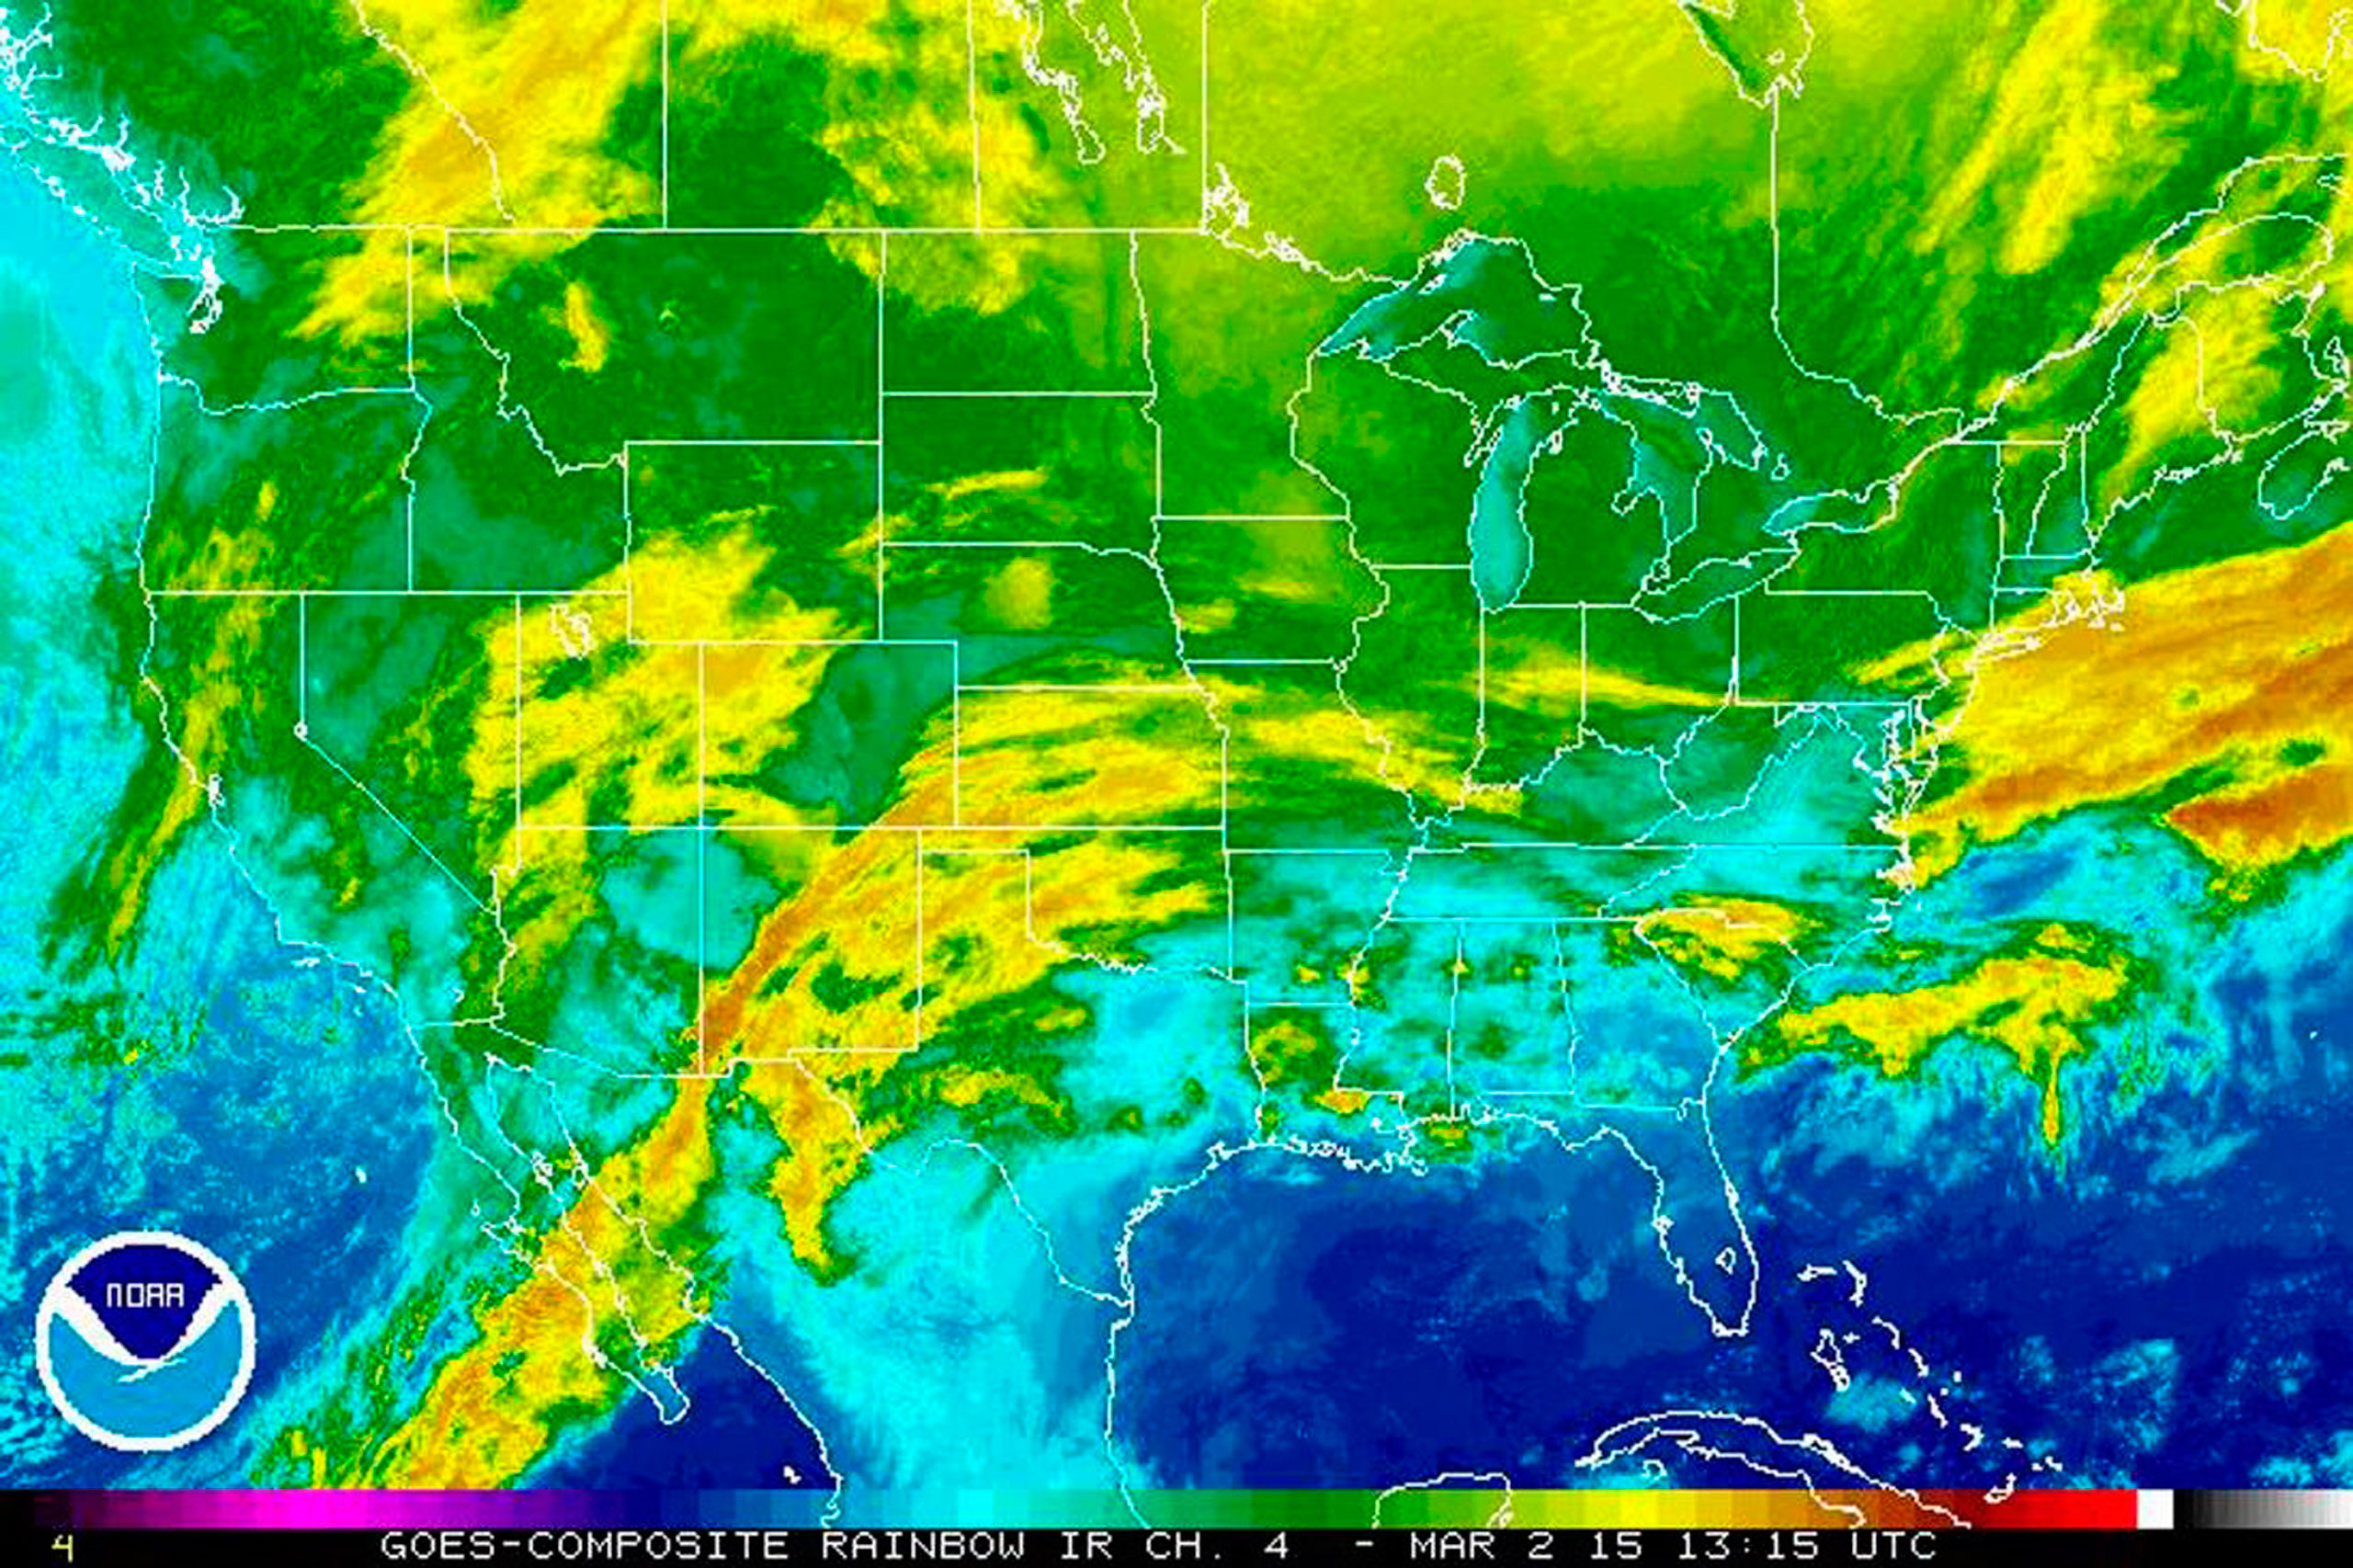 An infrared view of U.S. shows a storm poised to hit northern states across the nation with more snow and ice on March 2, 2015.